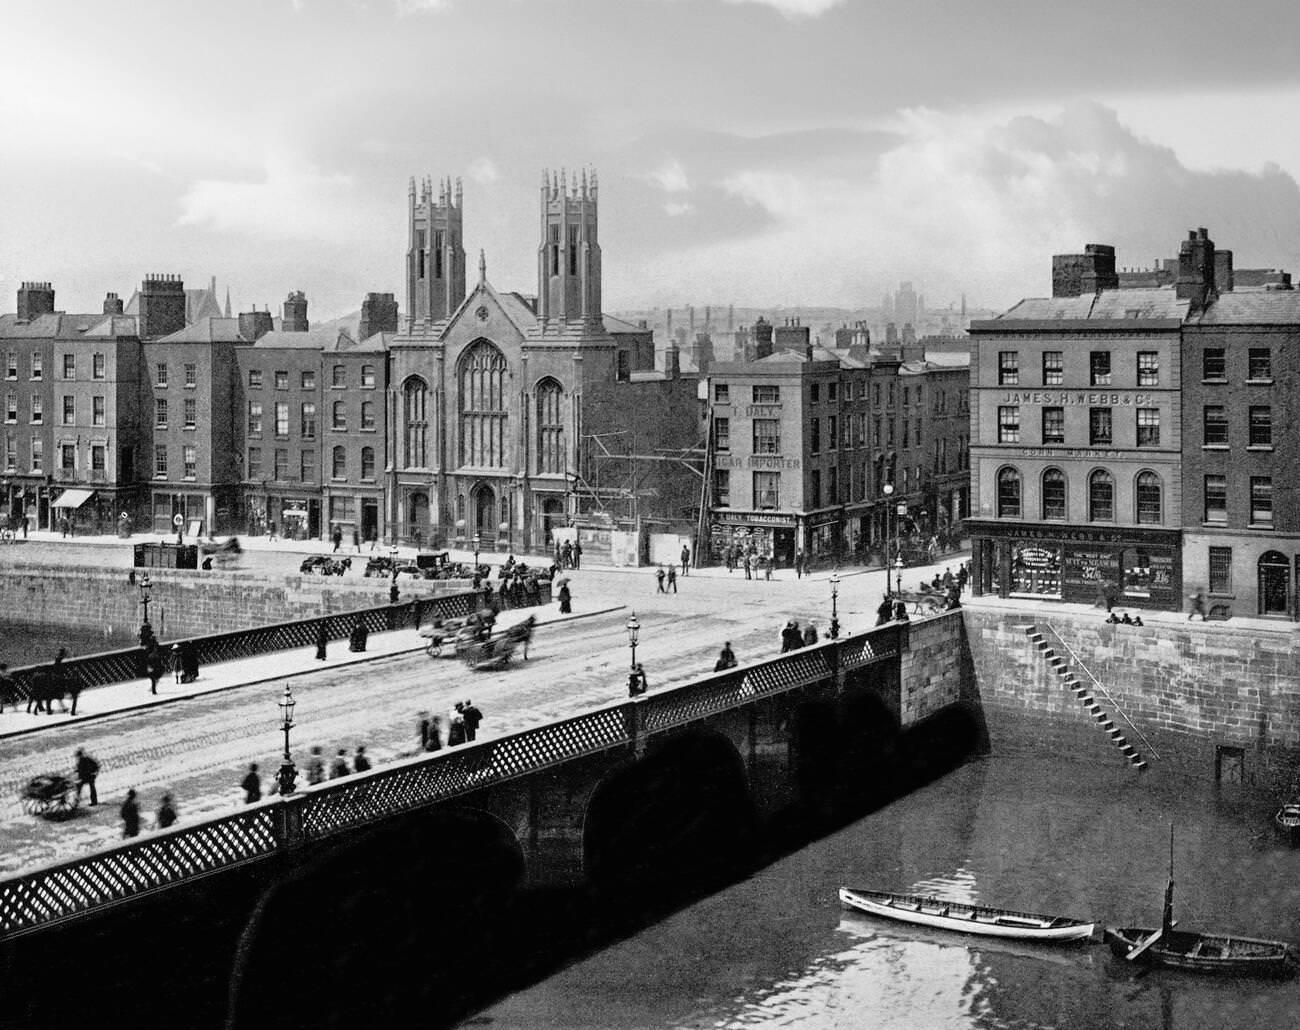 The Grattan Bridge, a road bridge spanning the River Liffey in Dublin, Ireland, and joining Capel Street to Parliament Street and the south quays.